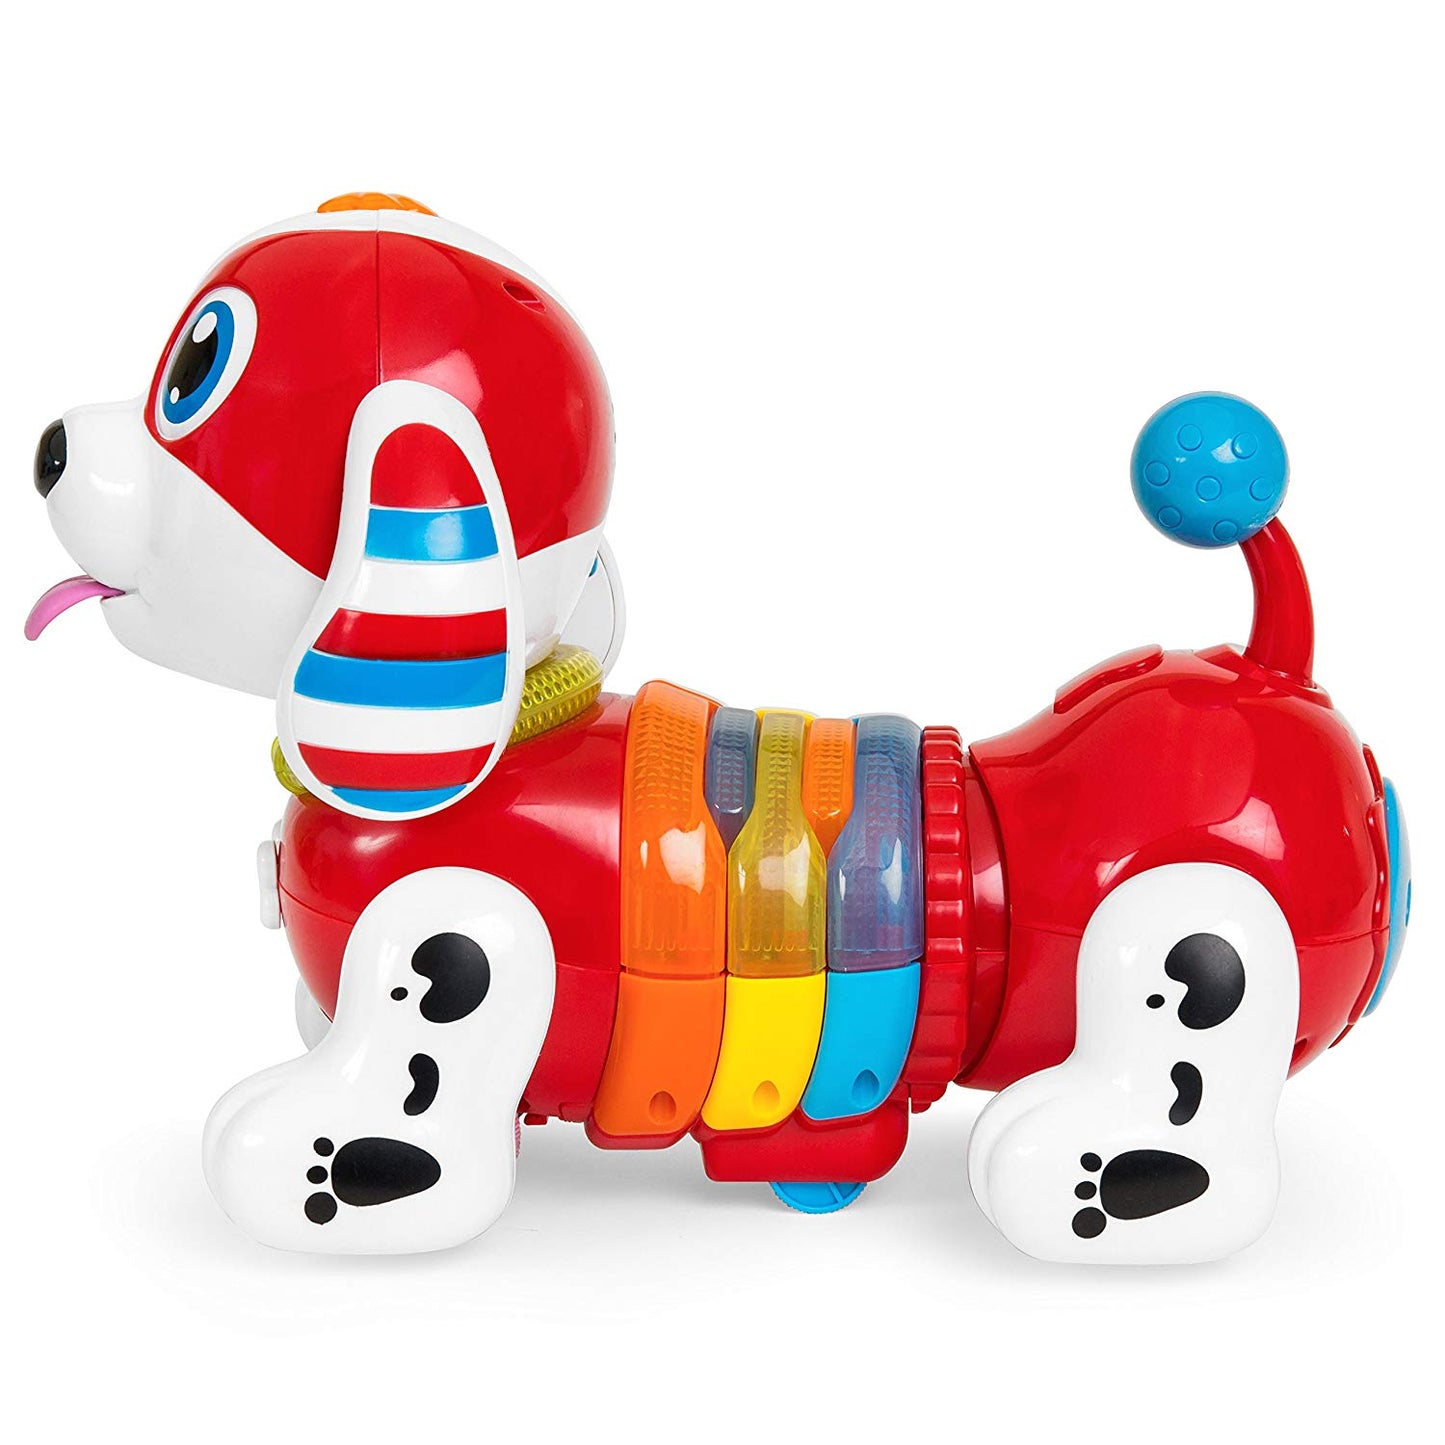 Kids Interactive Dancing RC Robotic Toy Dog w/ Music, Lights, Catchphrases, Touch Responsive